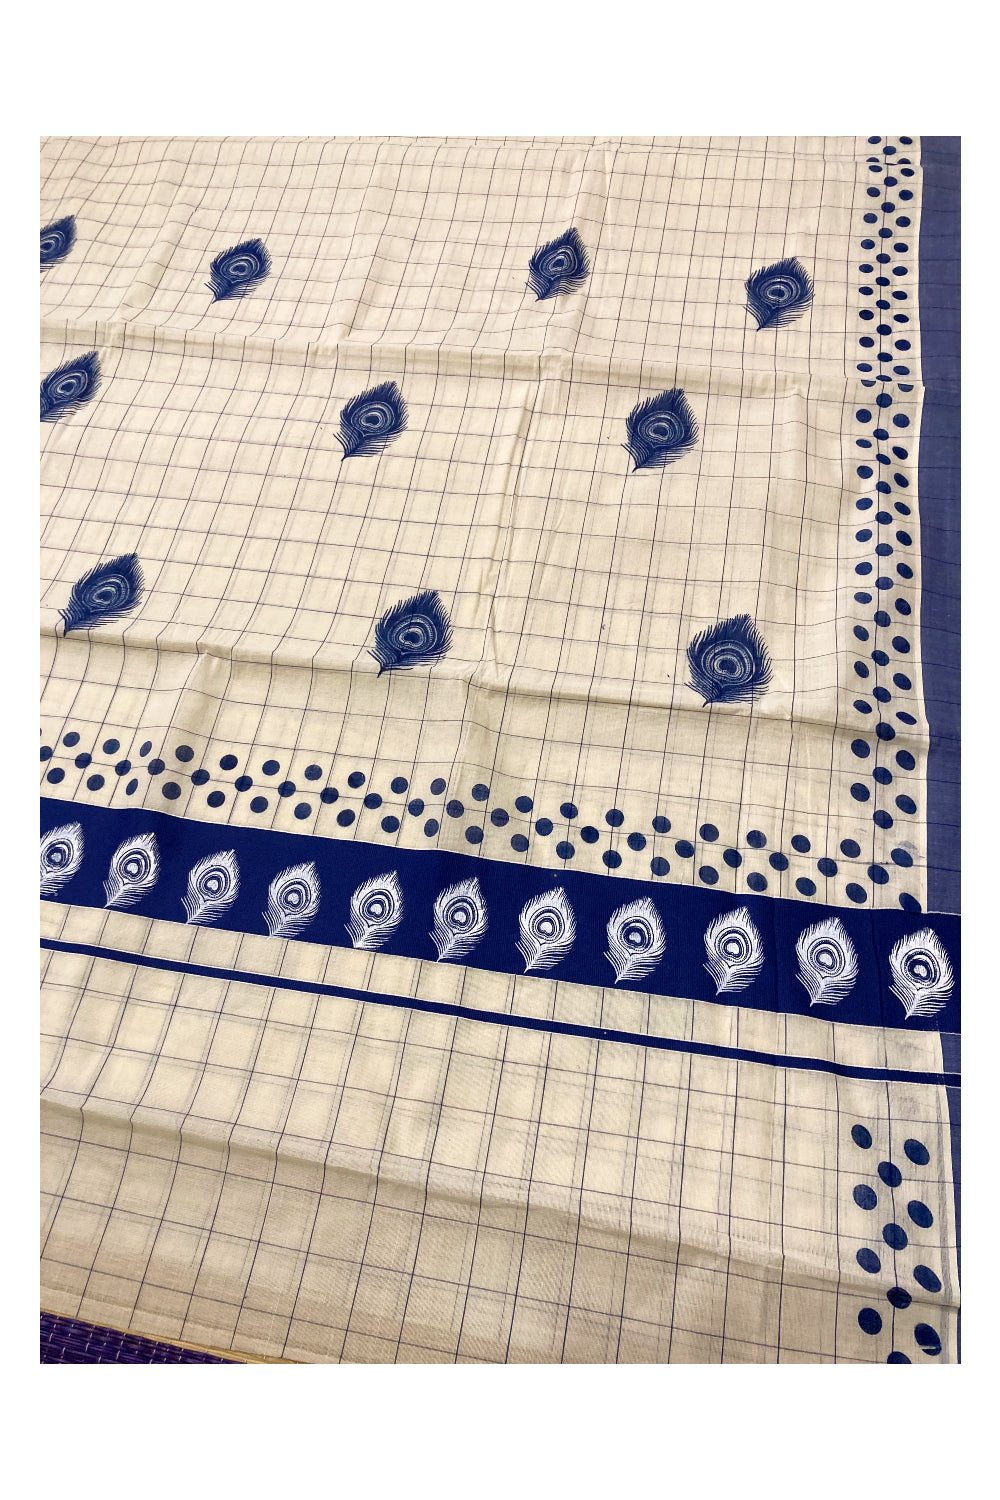 Pure Cotton Check Design Kerala Saree with Blue Polka Dots and Feather Block Prints